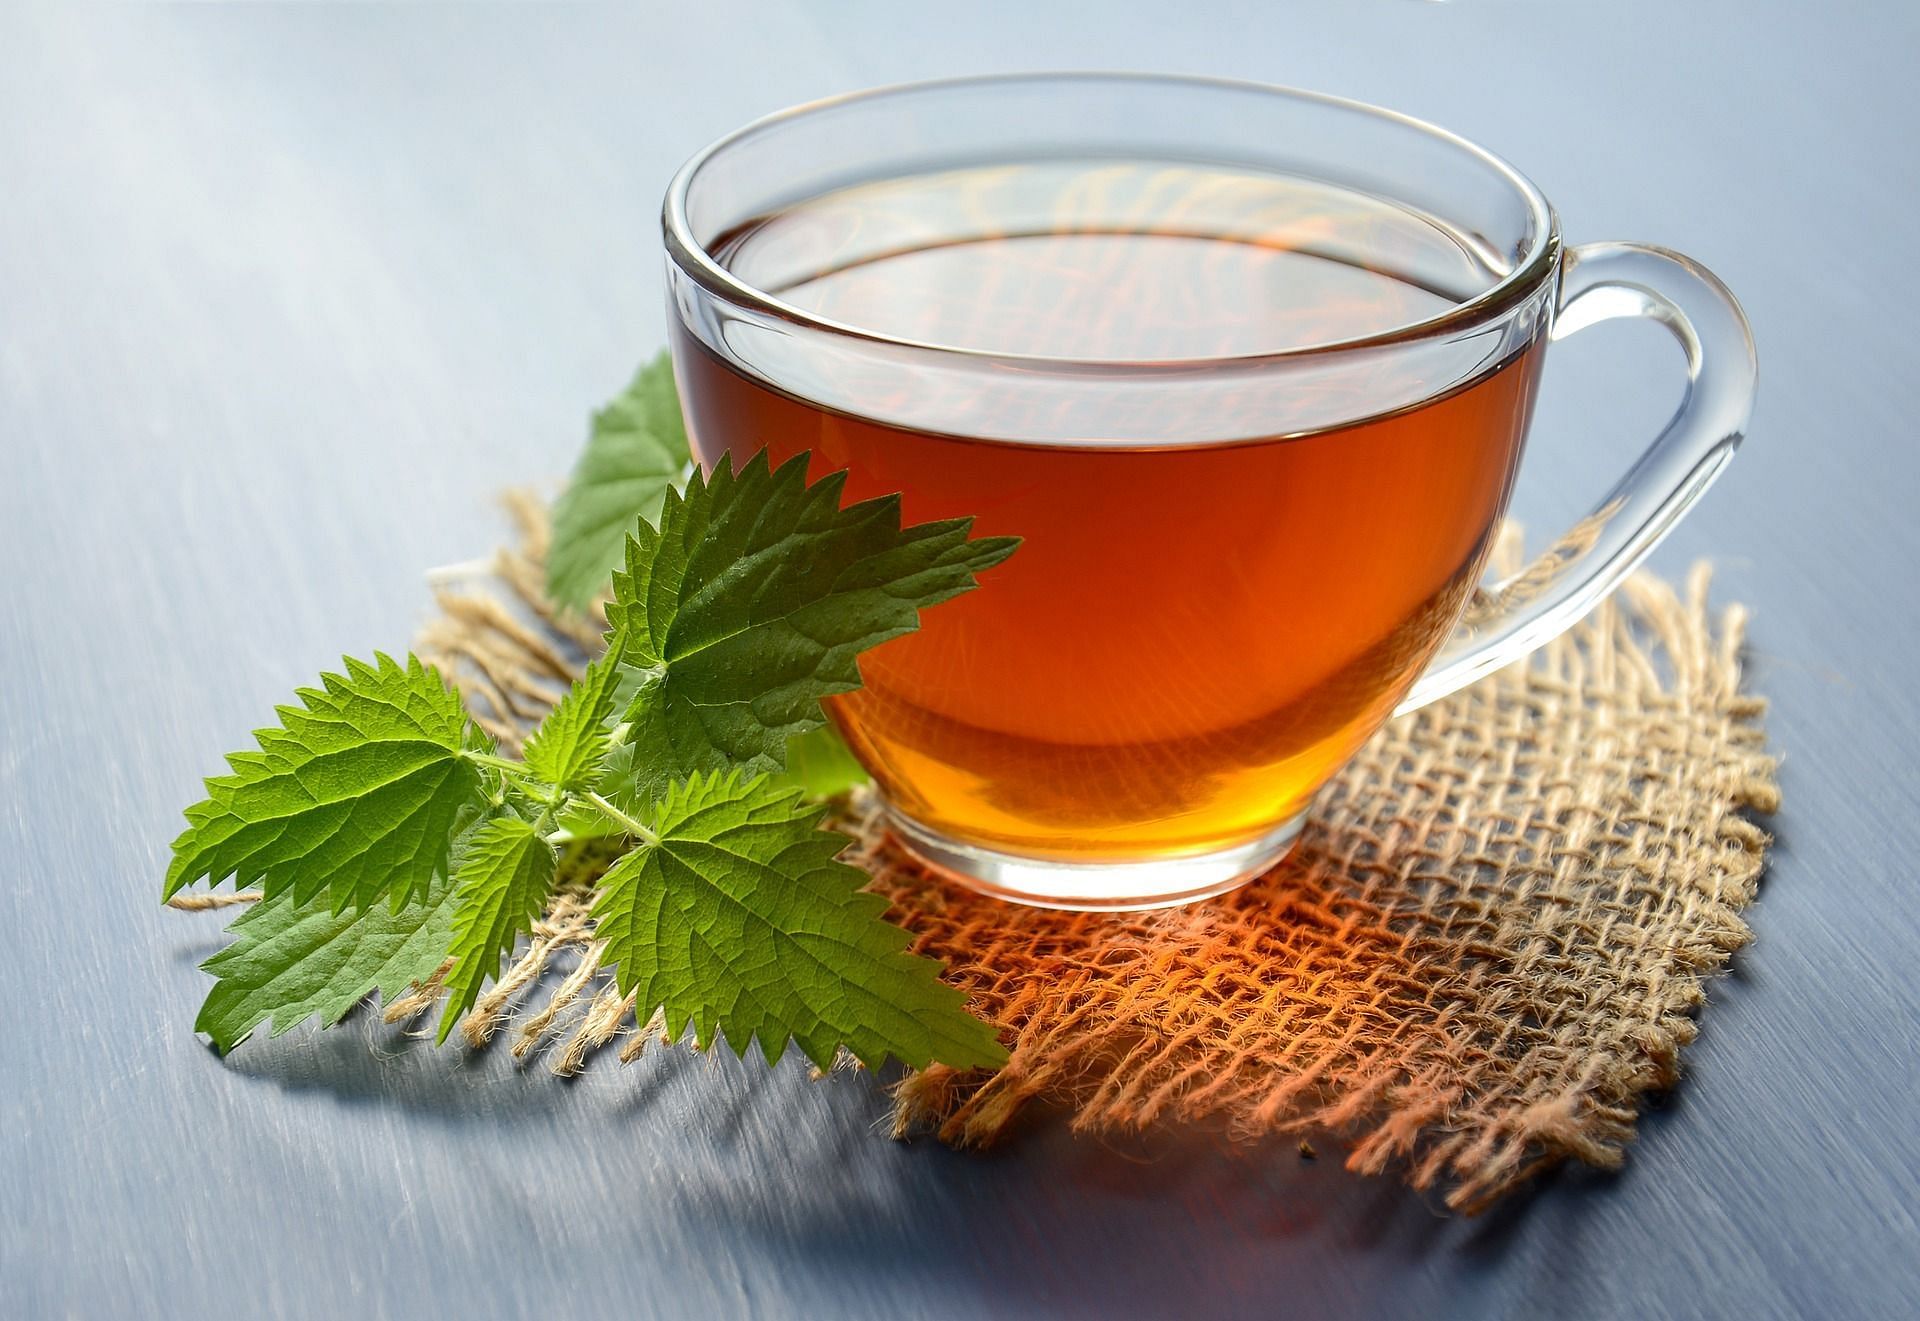 3 Health Benefits and 3 Side Effects of Nettle Tea